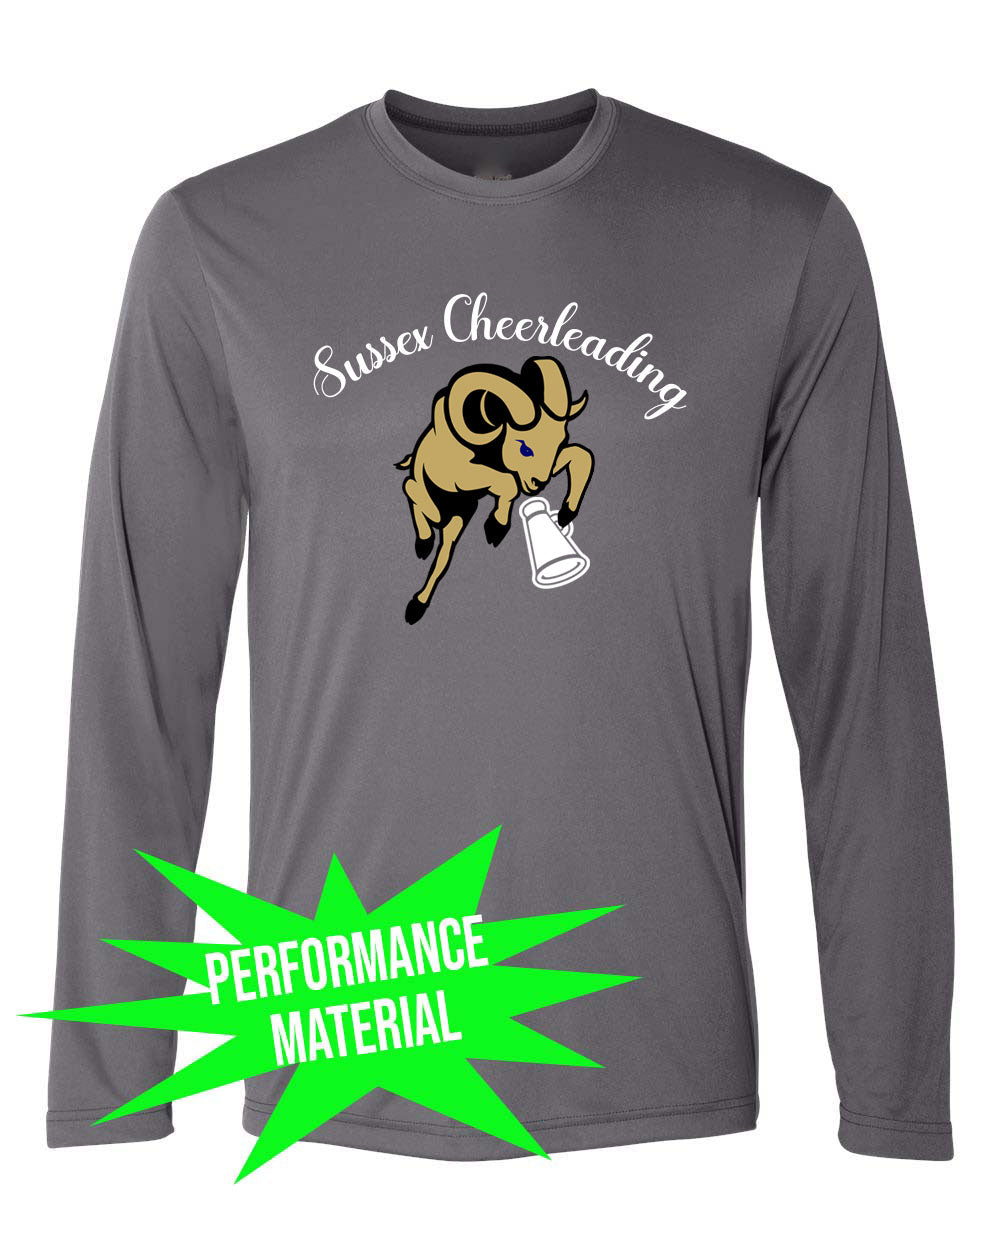 Sussex Middle Cheer Performance Material Design 3 Long Sleeve Shirt